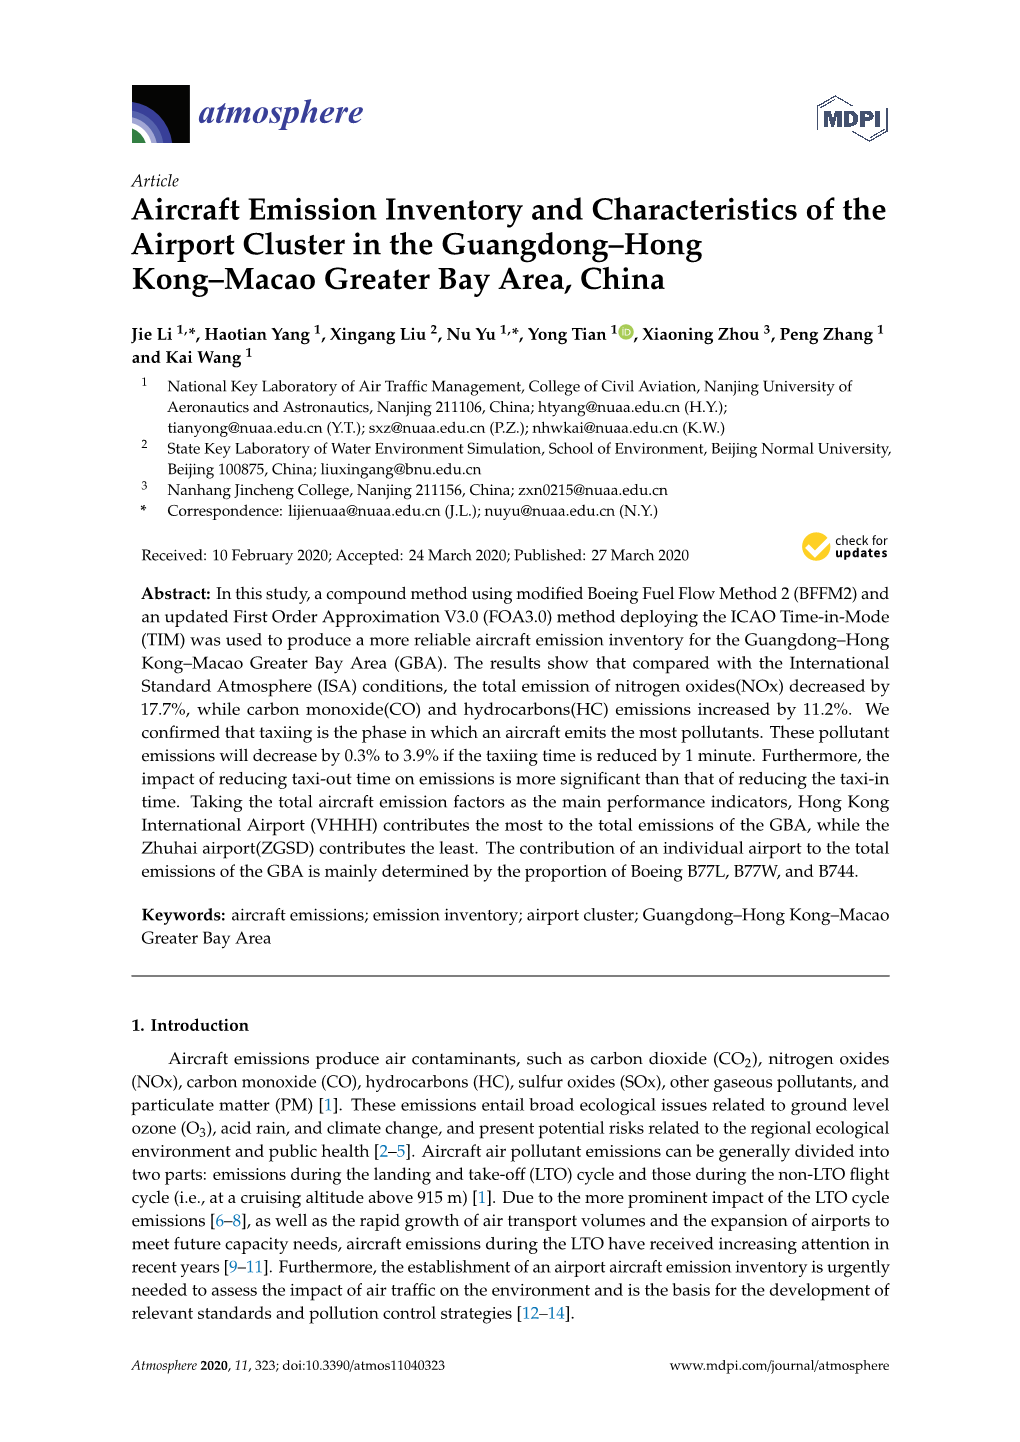 Aircraft Emission Inventory and Characteristics of the Airport Cluster in the Guangdong–Hong Kong–Macao Greater Bay Area, China